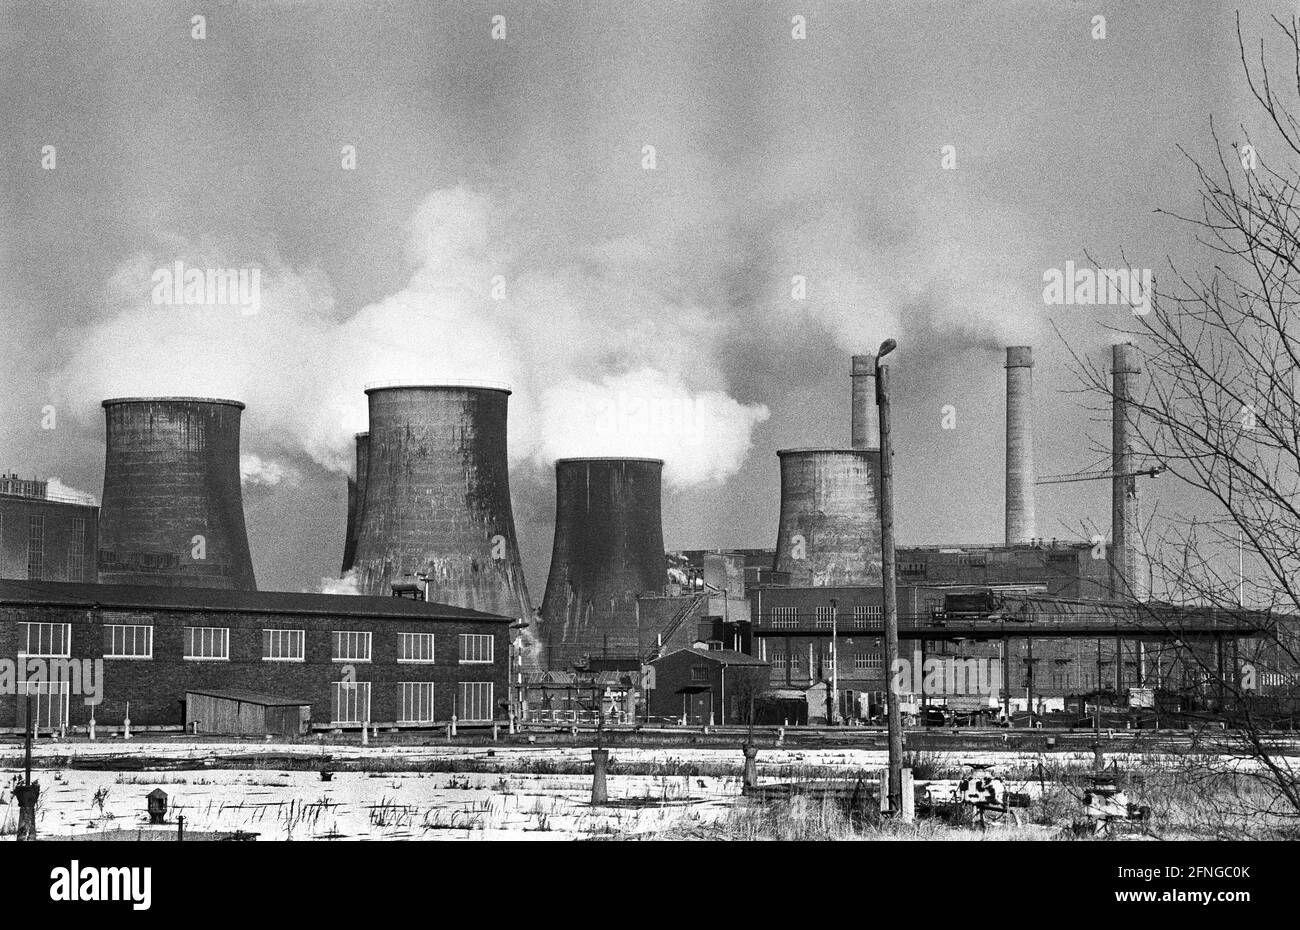 Germany, Espenhain, 07.01.1990. Archive-No.: 12-09-21 The Kombinat Espenhain  (more precisely VEB Kombinat Espenhain) was a plant for the extraction and  processing of brown coal. Photo: View of the plant [automated translation]  Stock